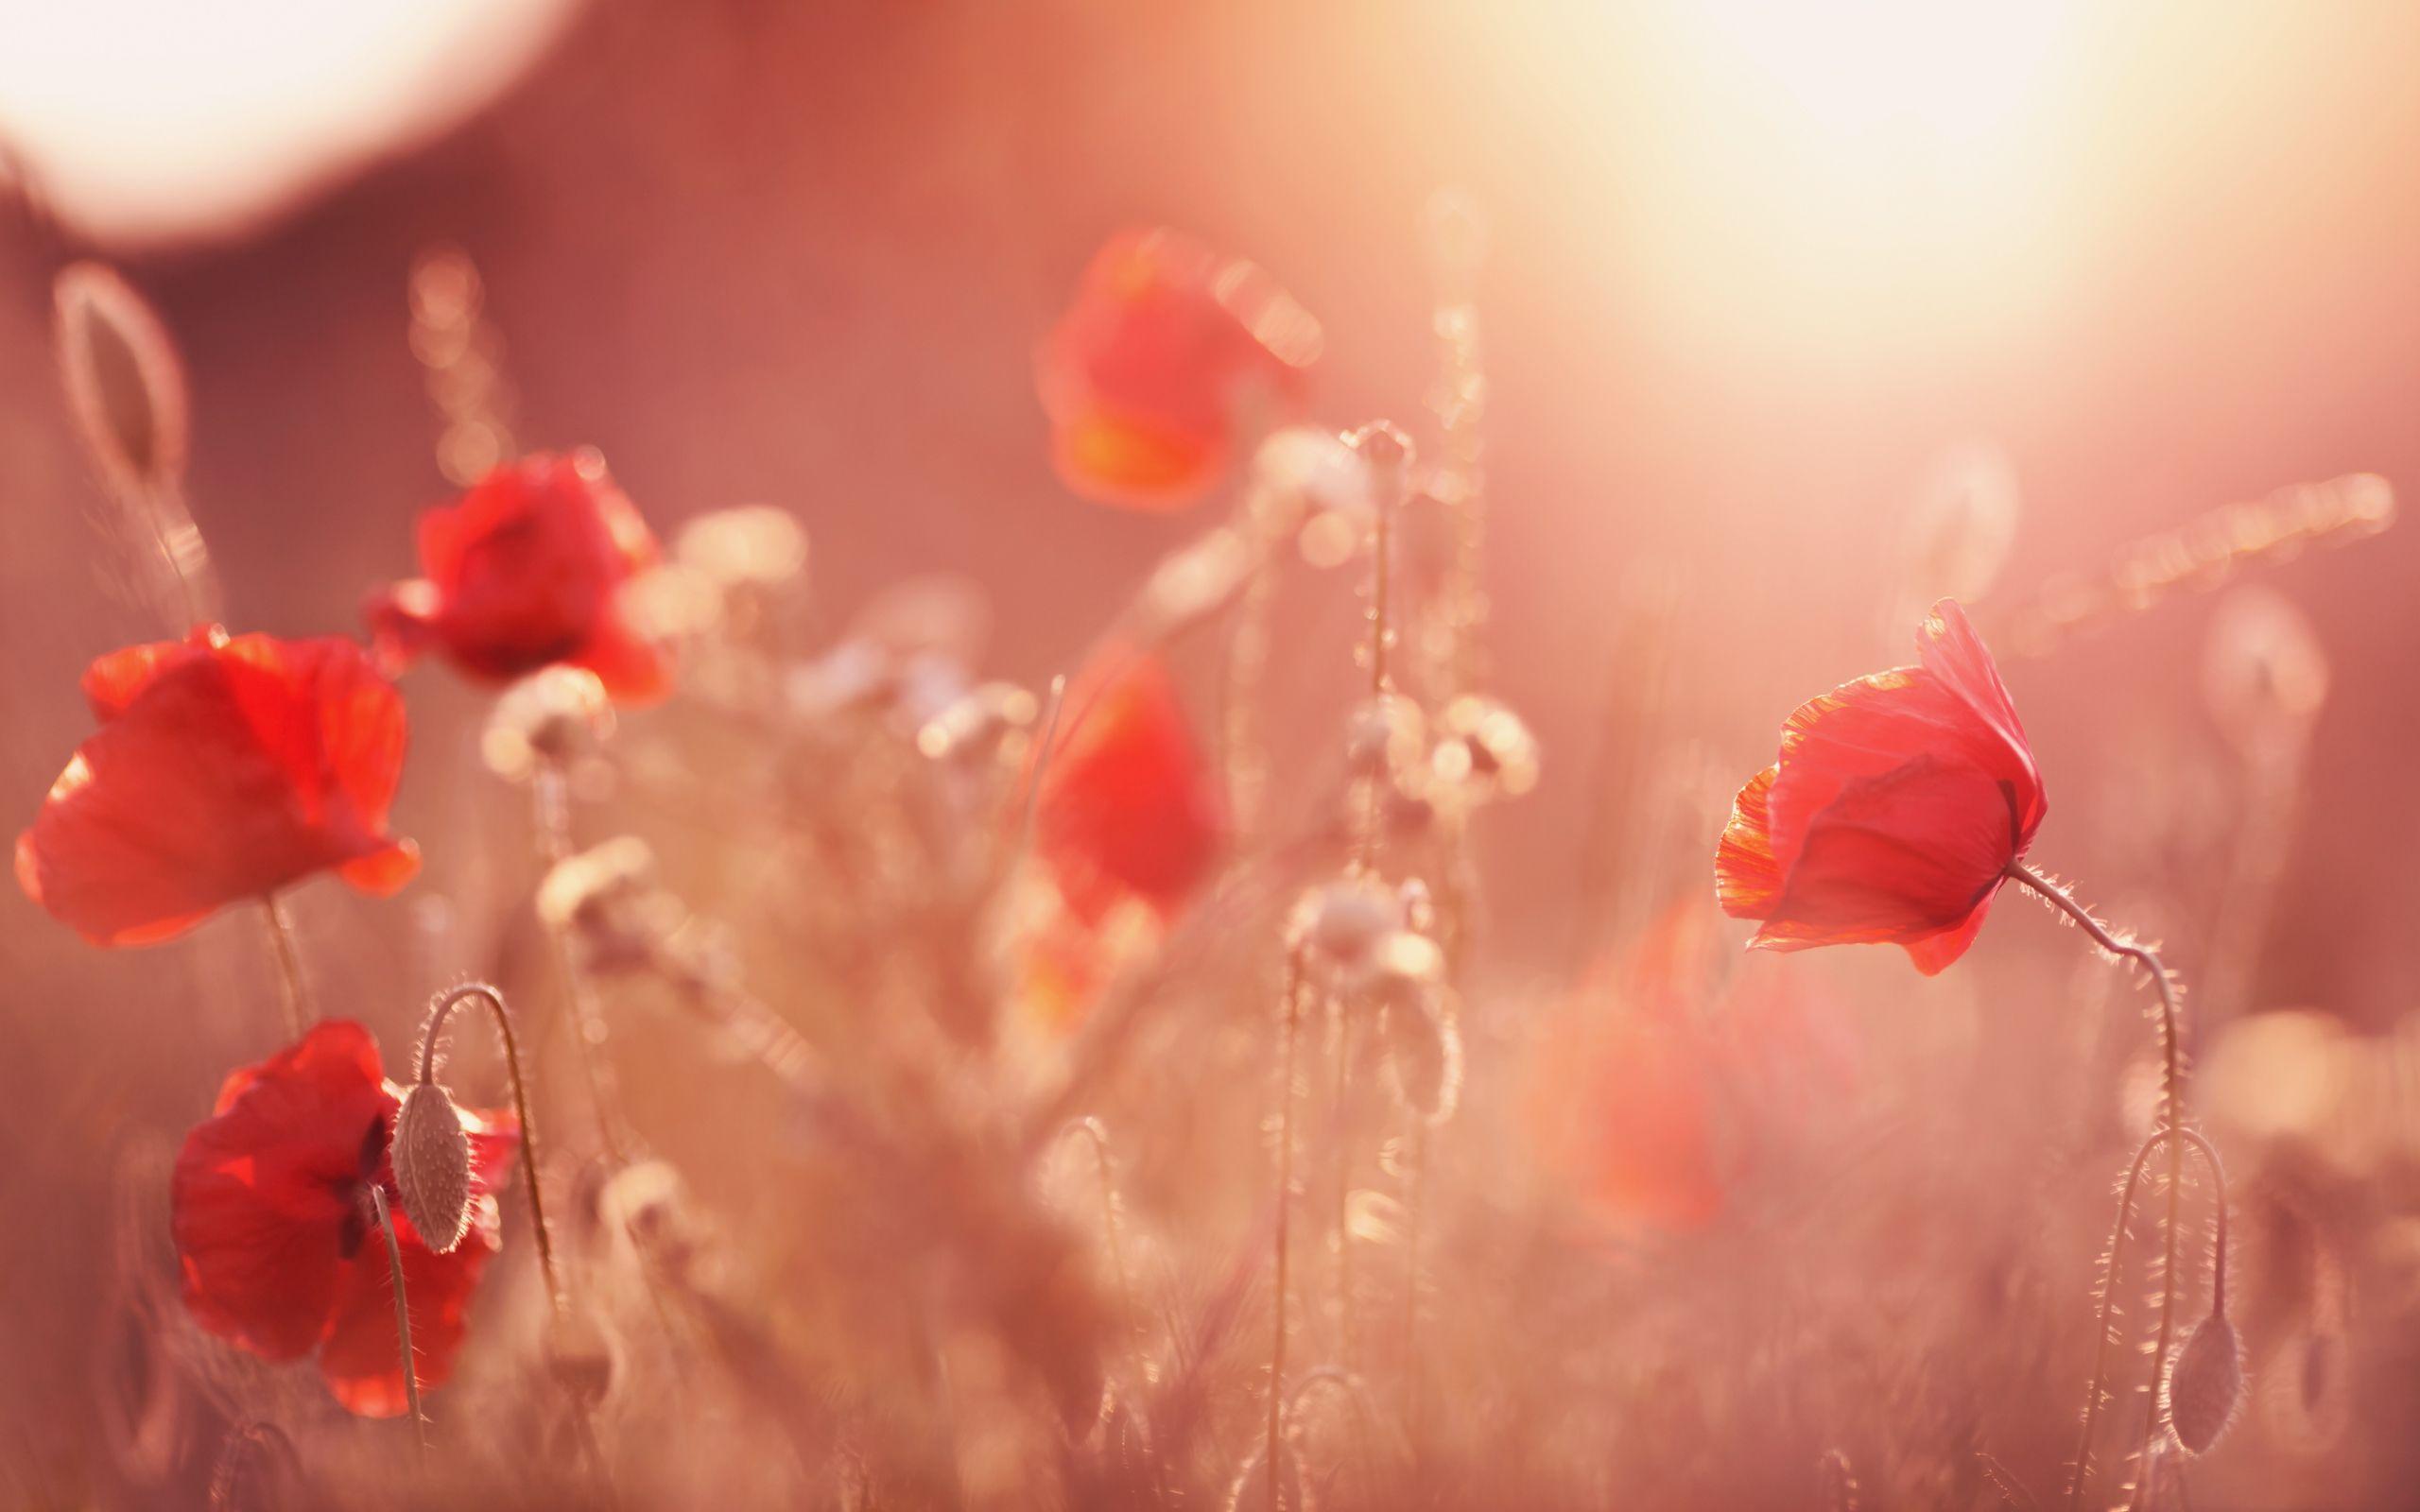 Daily Wallpaper: Sunset Poppy Field. I Like To Waste My Time